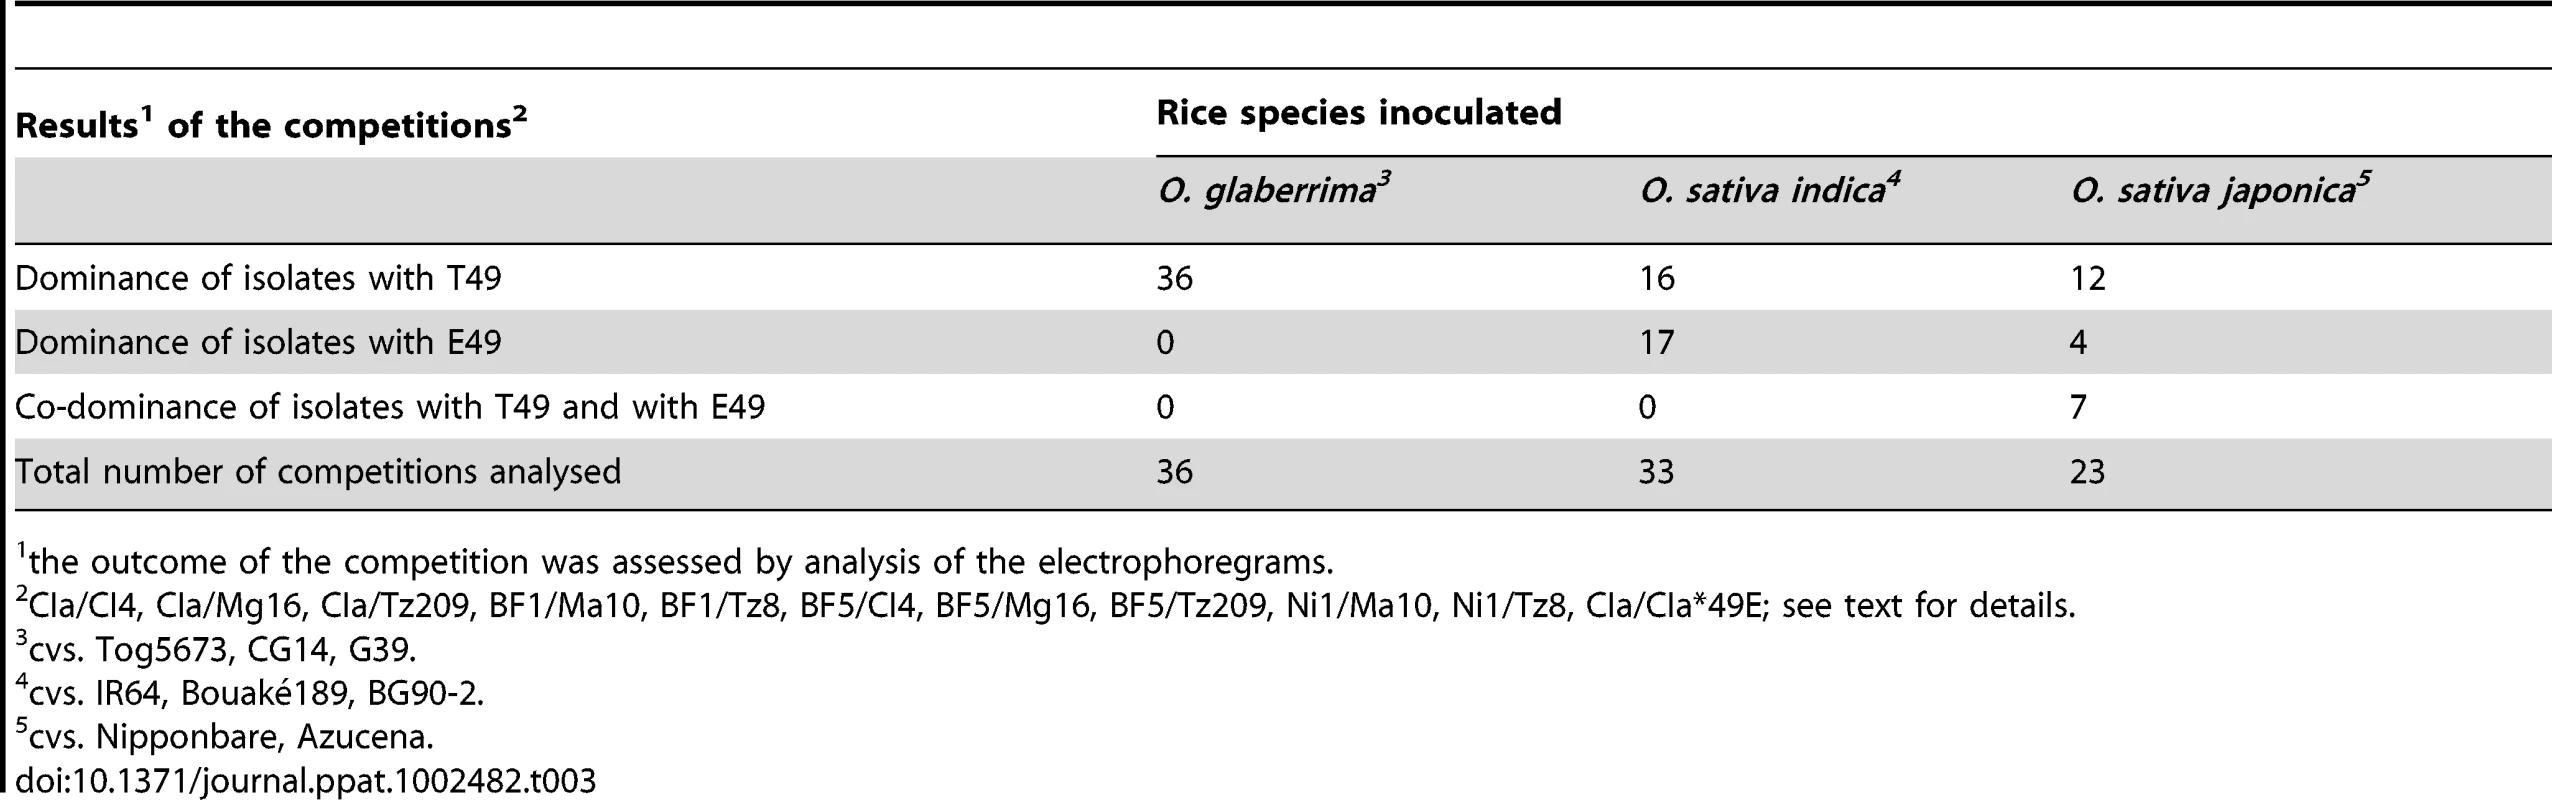 Outcome of the competitions between RYMV isolates with T49 and E49 after co-inoculation of susceptible <i>O. glaberrima</i>, <i>O. sativa indica</i> and <i>O. sativa japonica</i> cultivars.